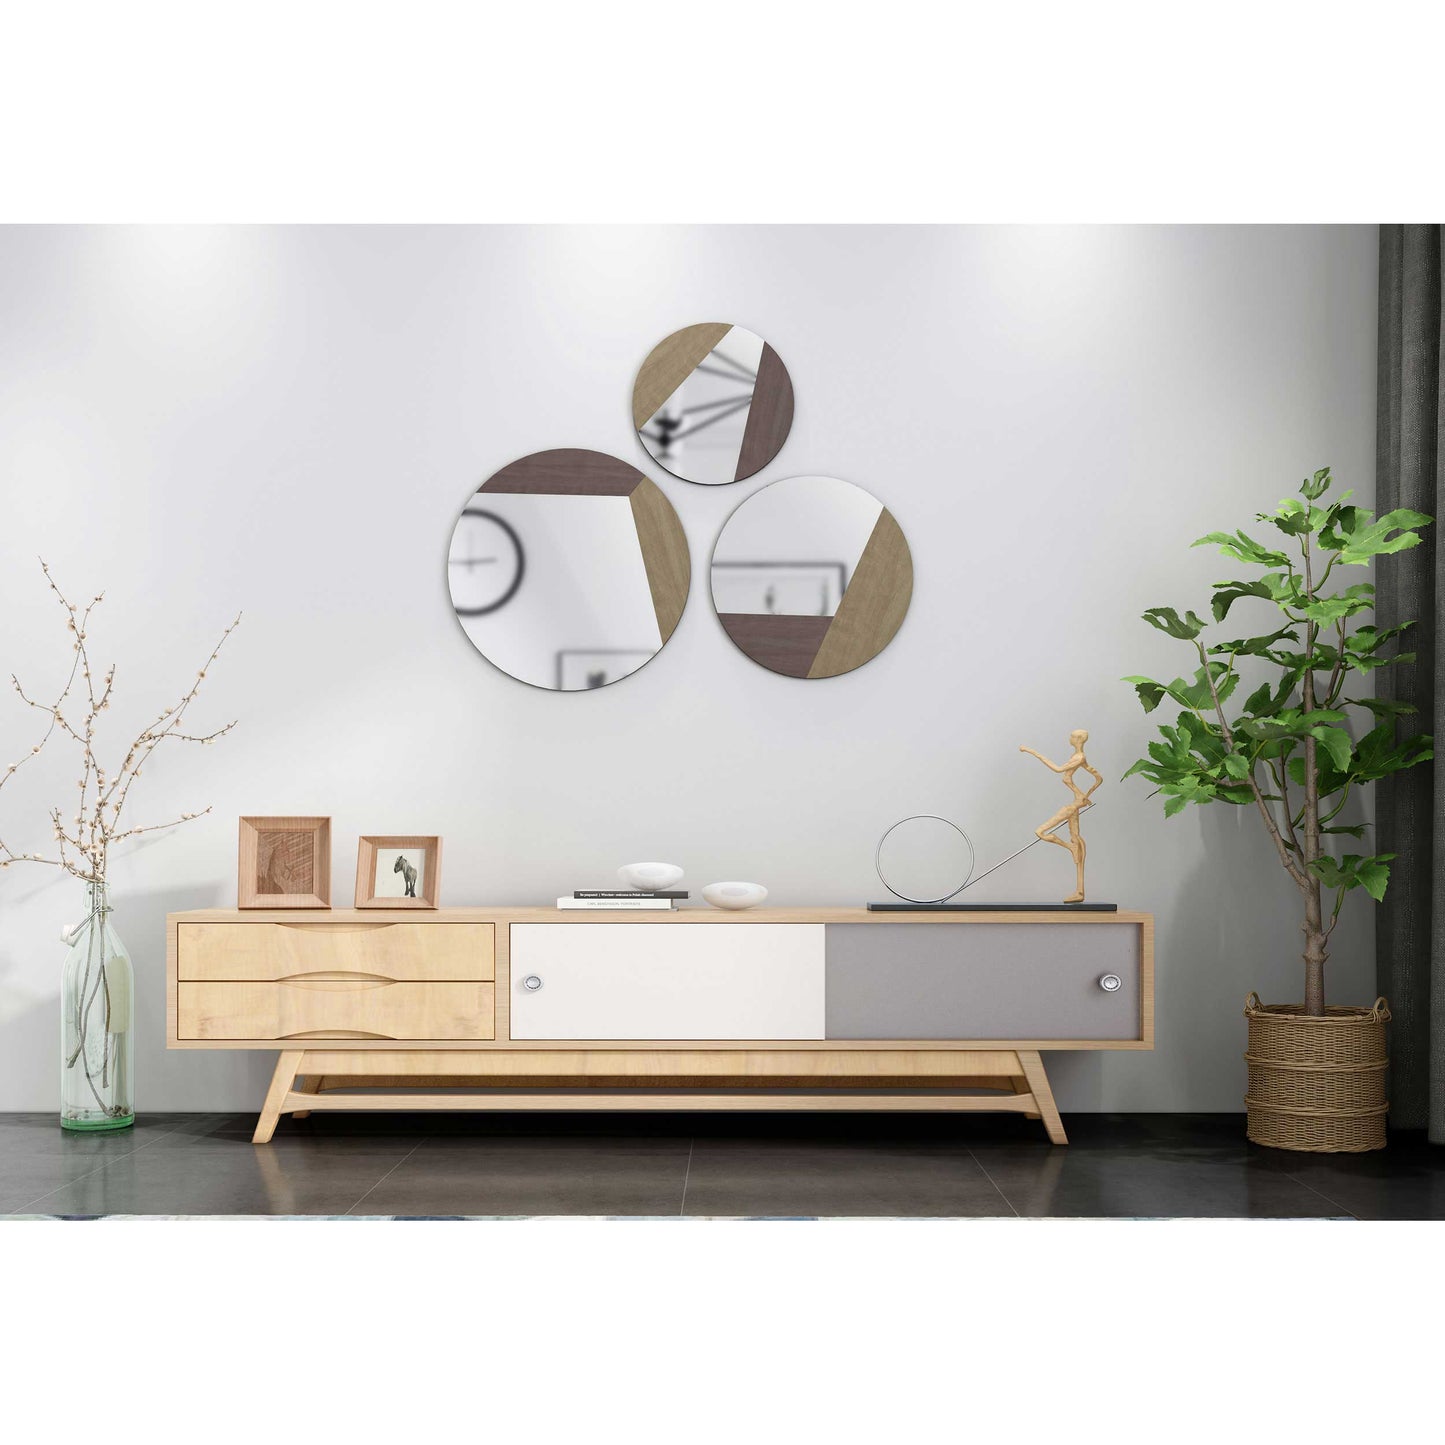 Modern space with Maklin accent mirror set above console